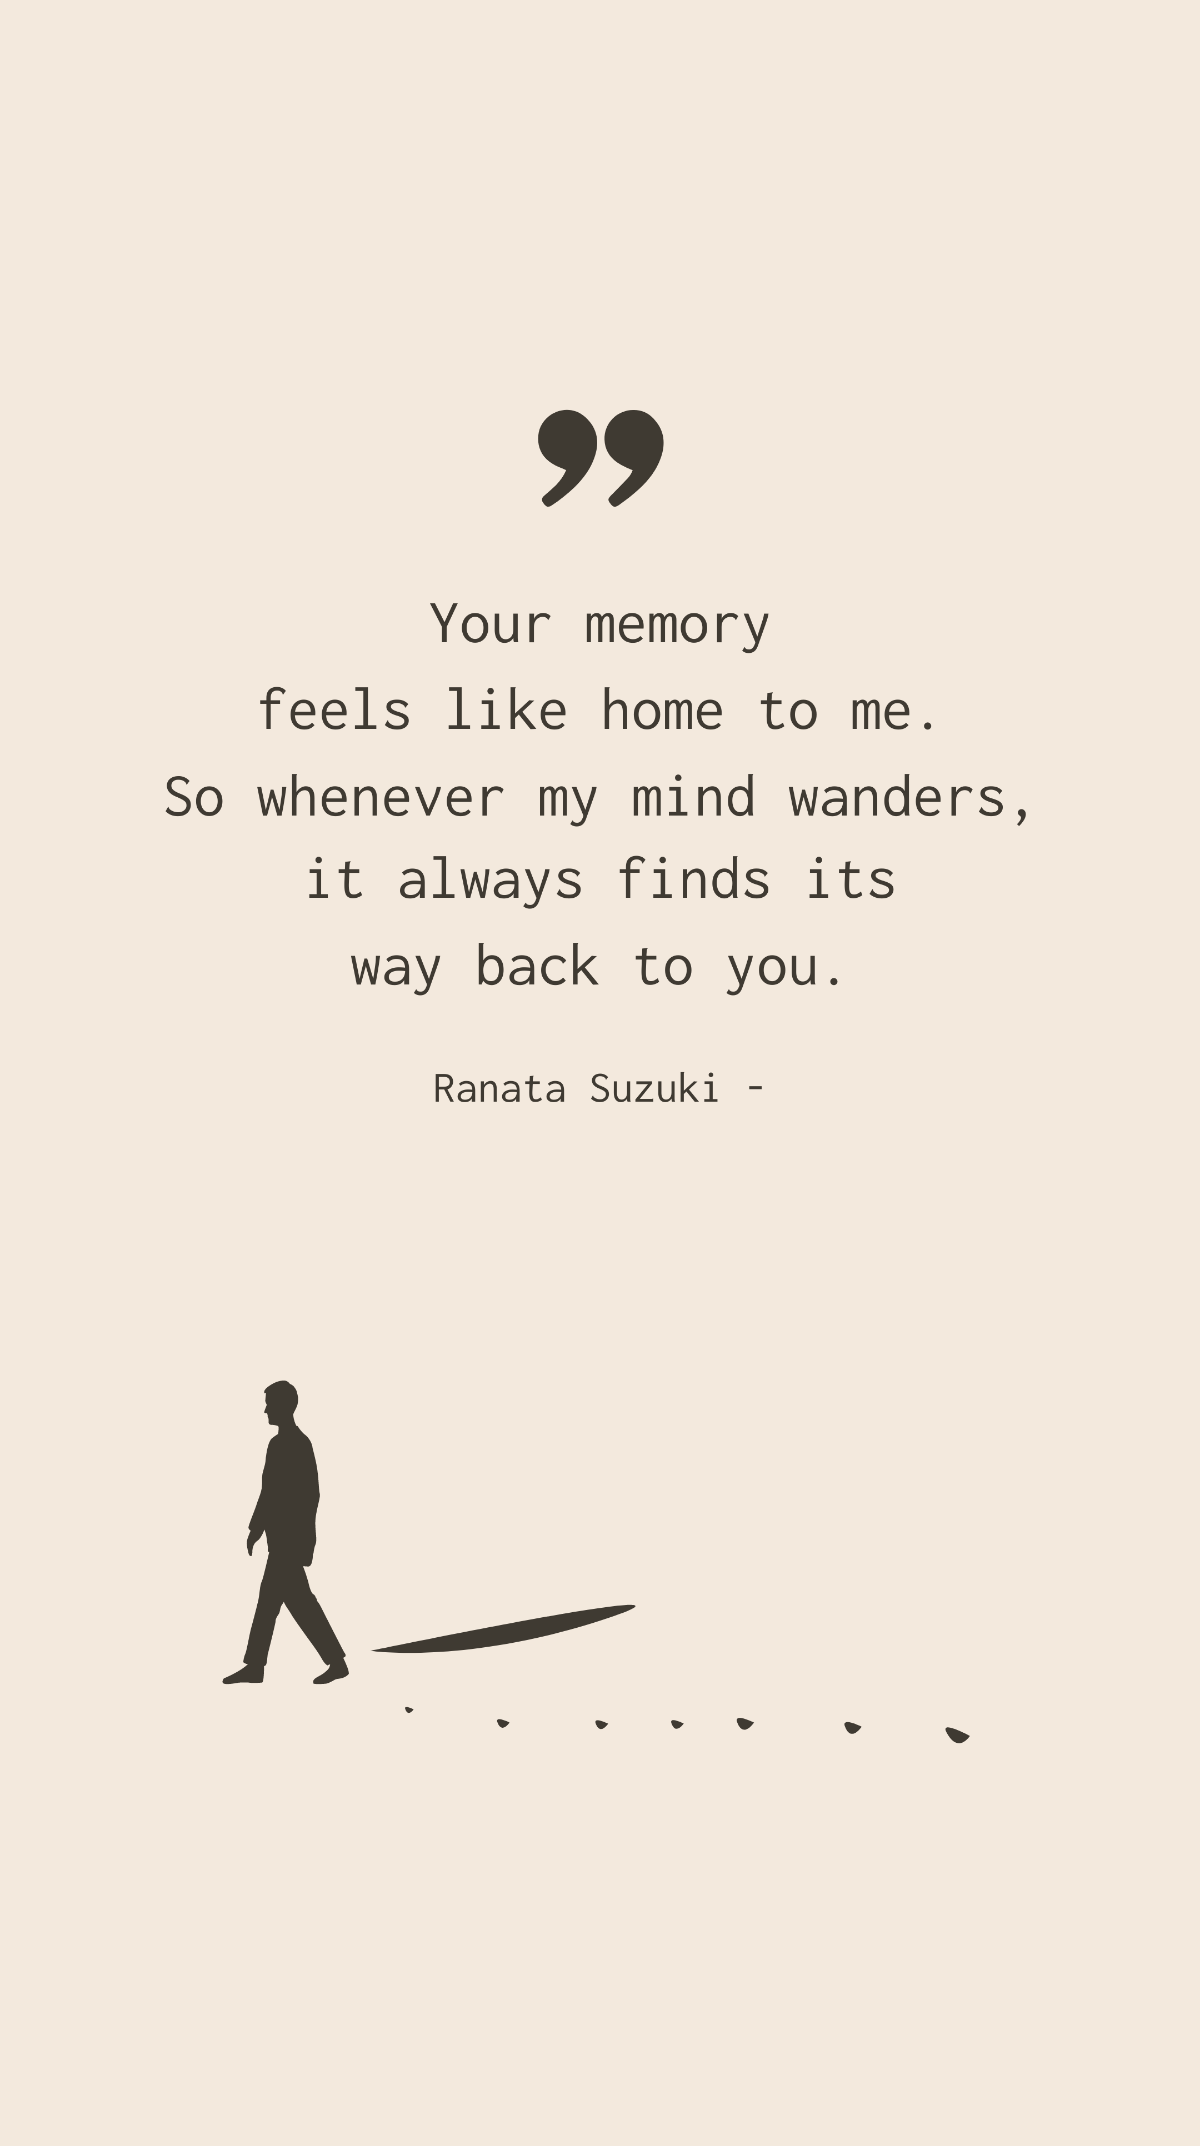 Ranata Suzuki - Your memory feels like home to me. So whenever my mind wanders, it always finds its way back to you. Template